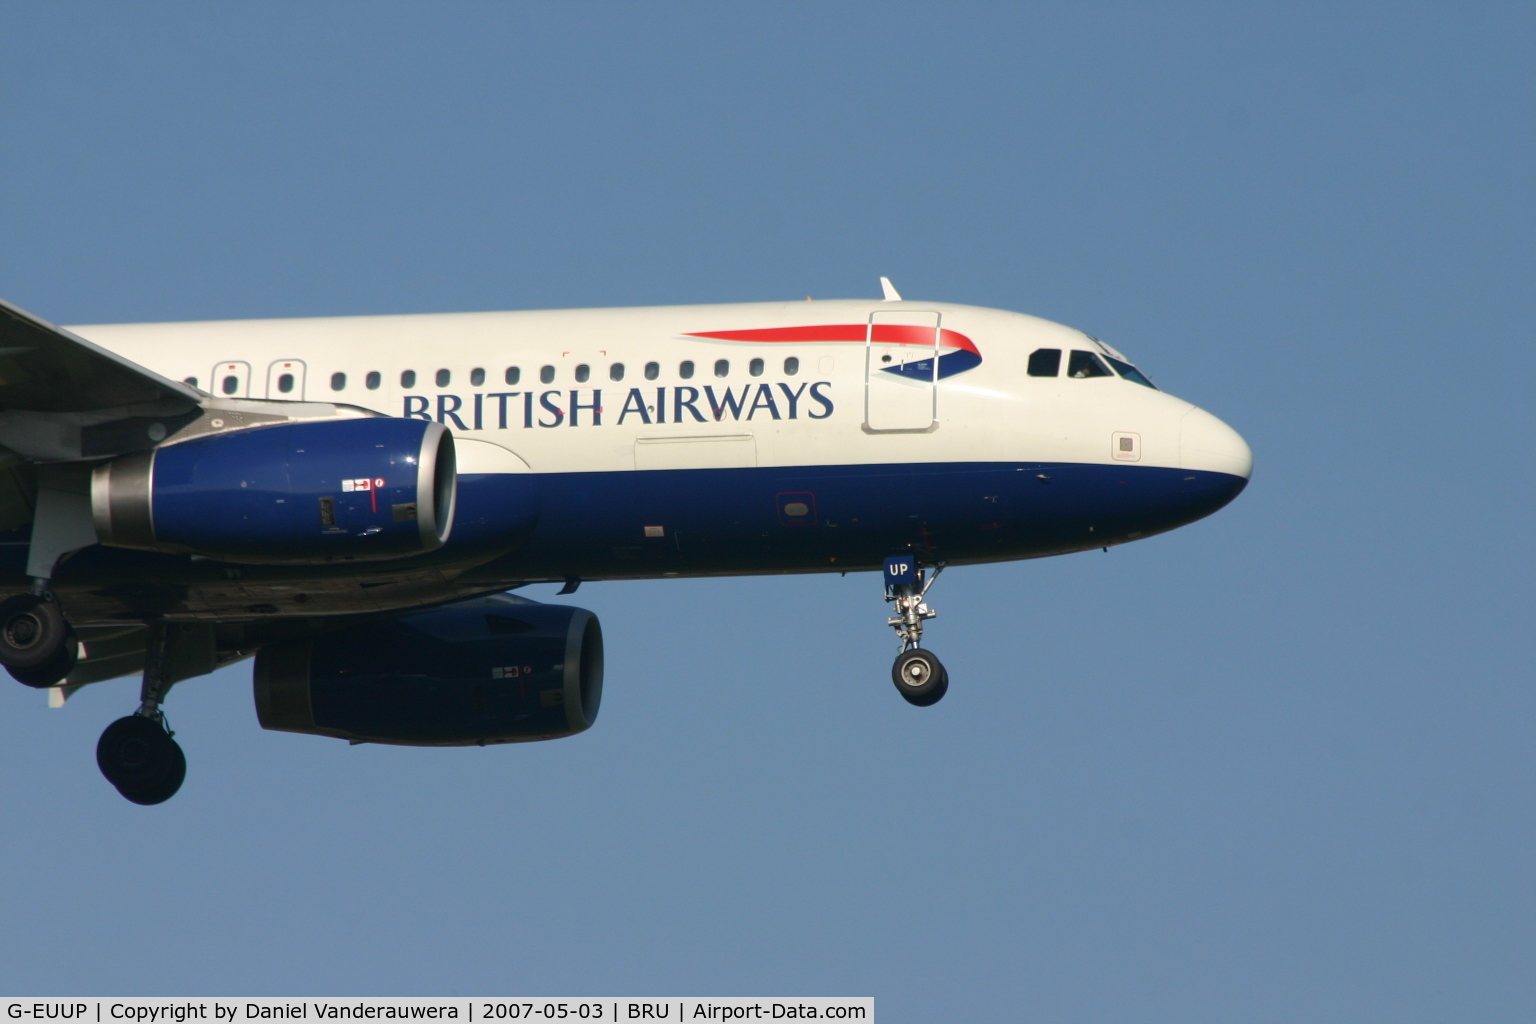 G-EUUP, 2003 Airbus A320-232 C/N 2038, arrival of flight BA388 from LHR